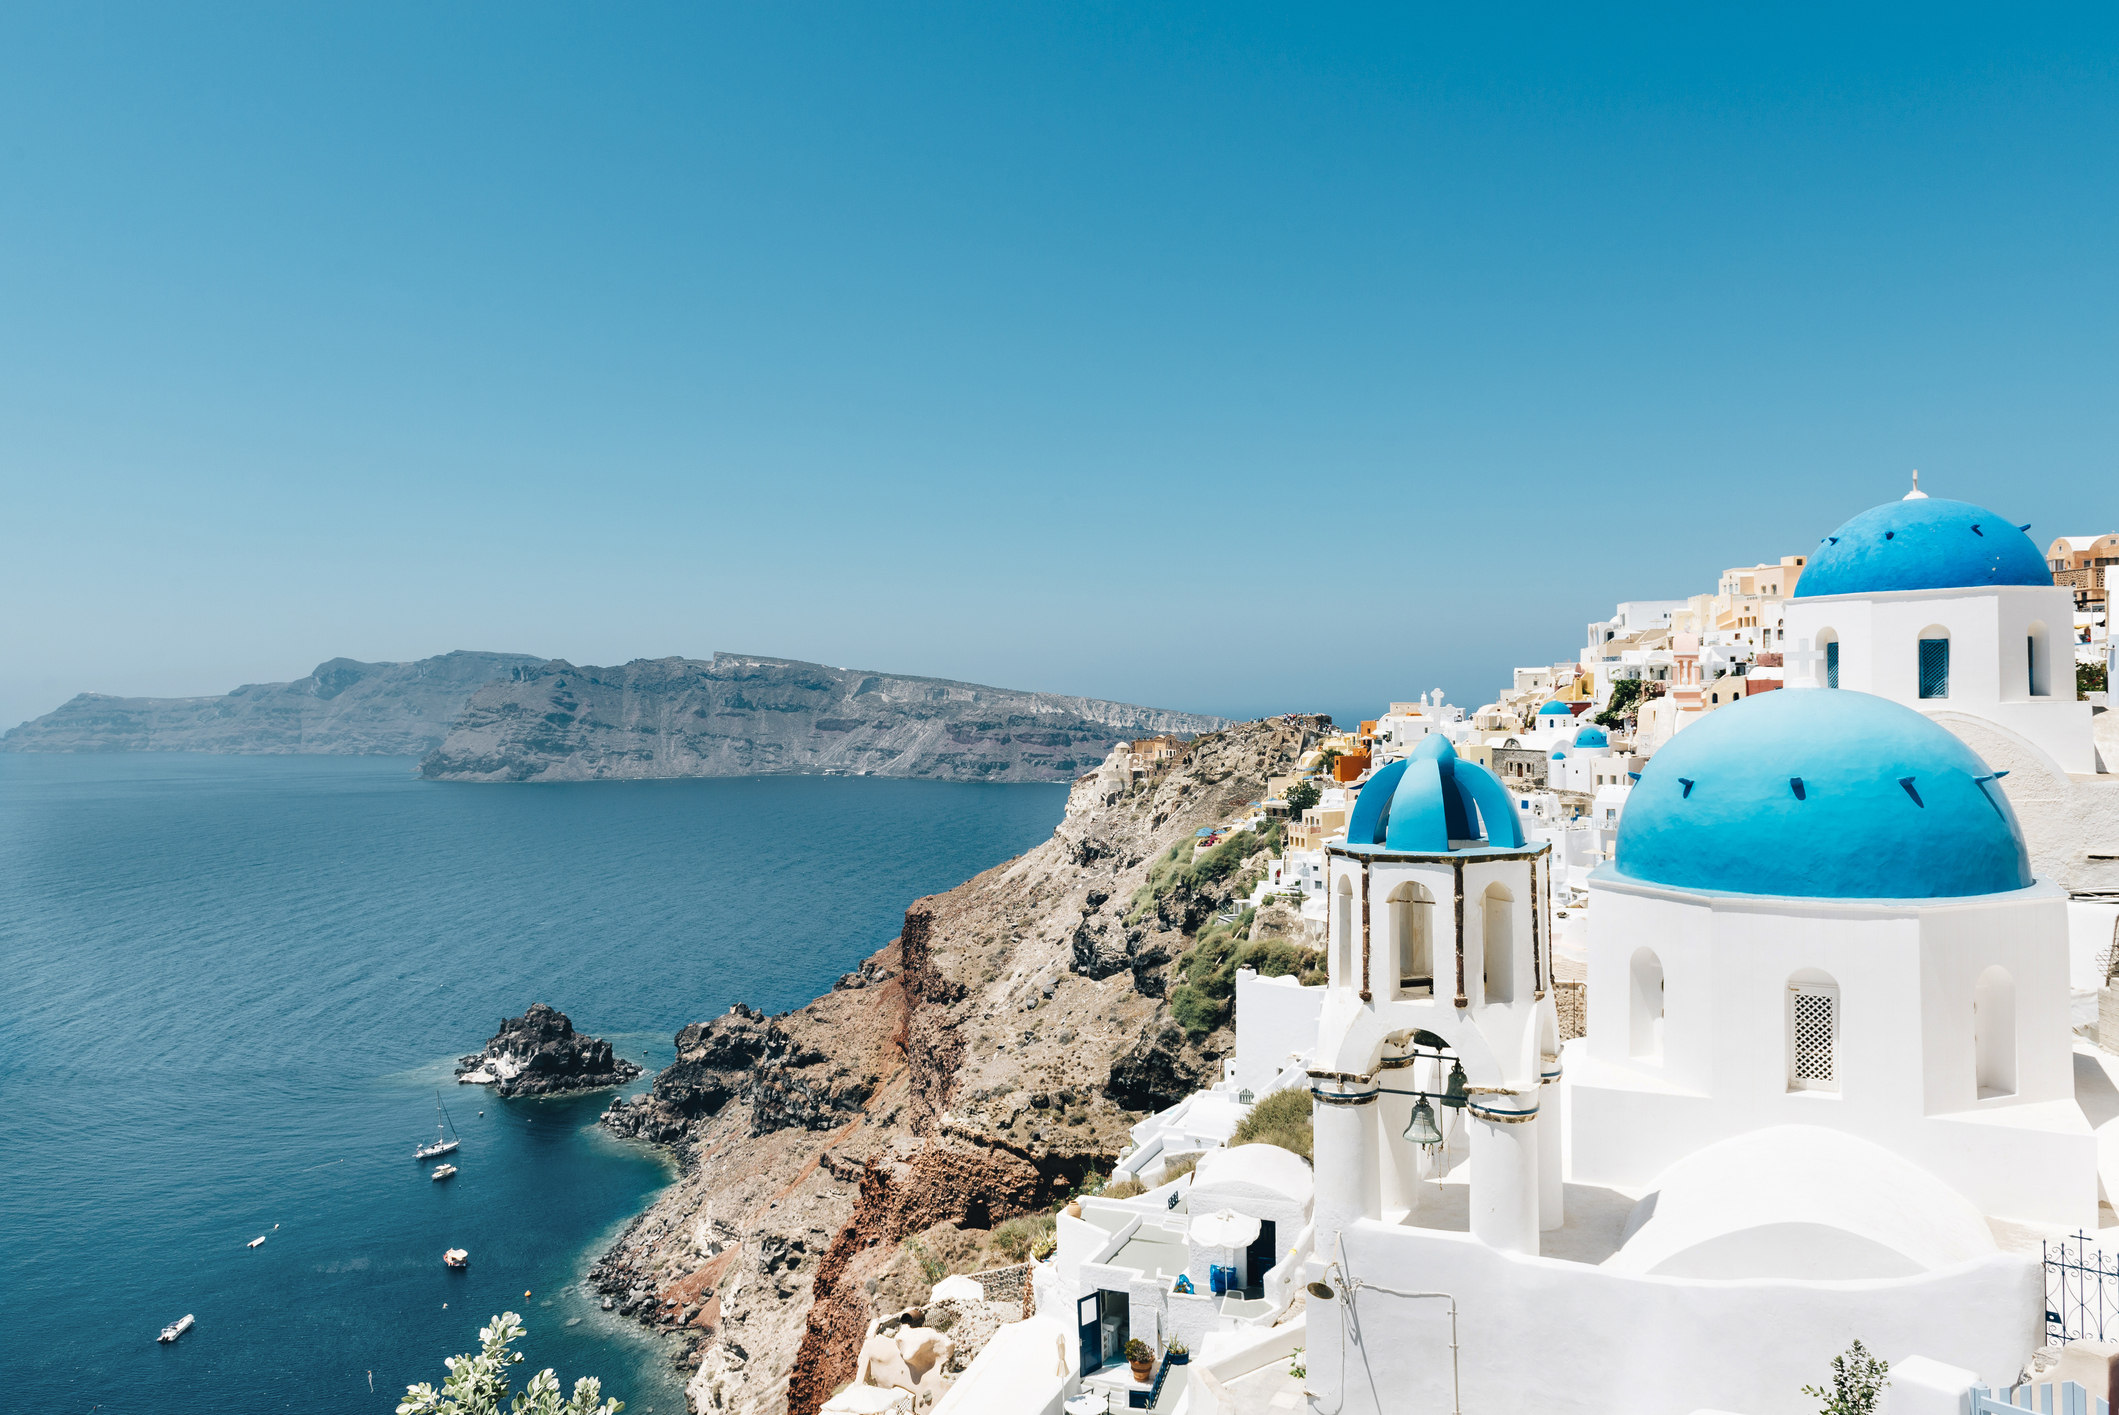 Scenic view of Santorini with iconic blue-domed churches and buildings overlooking the sea